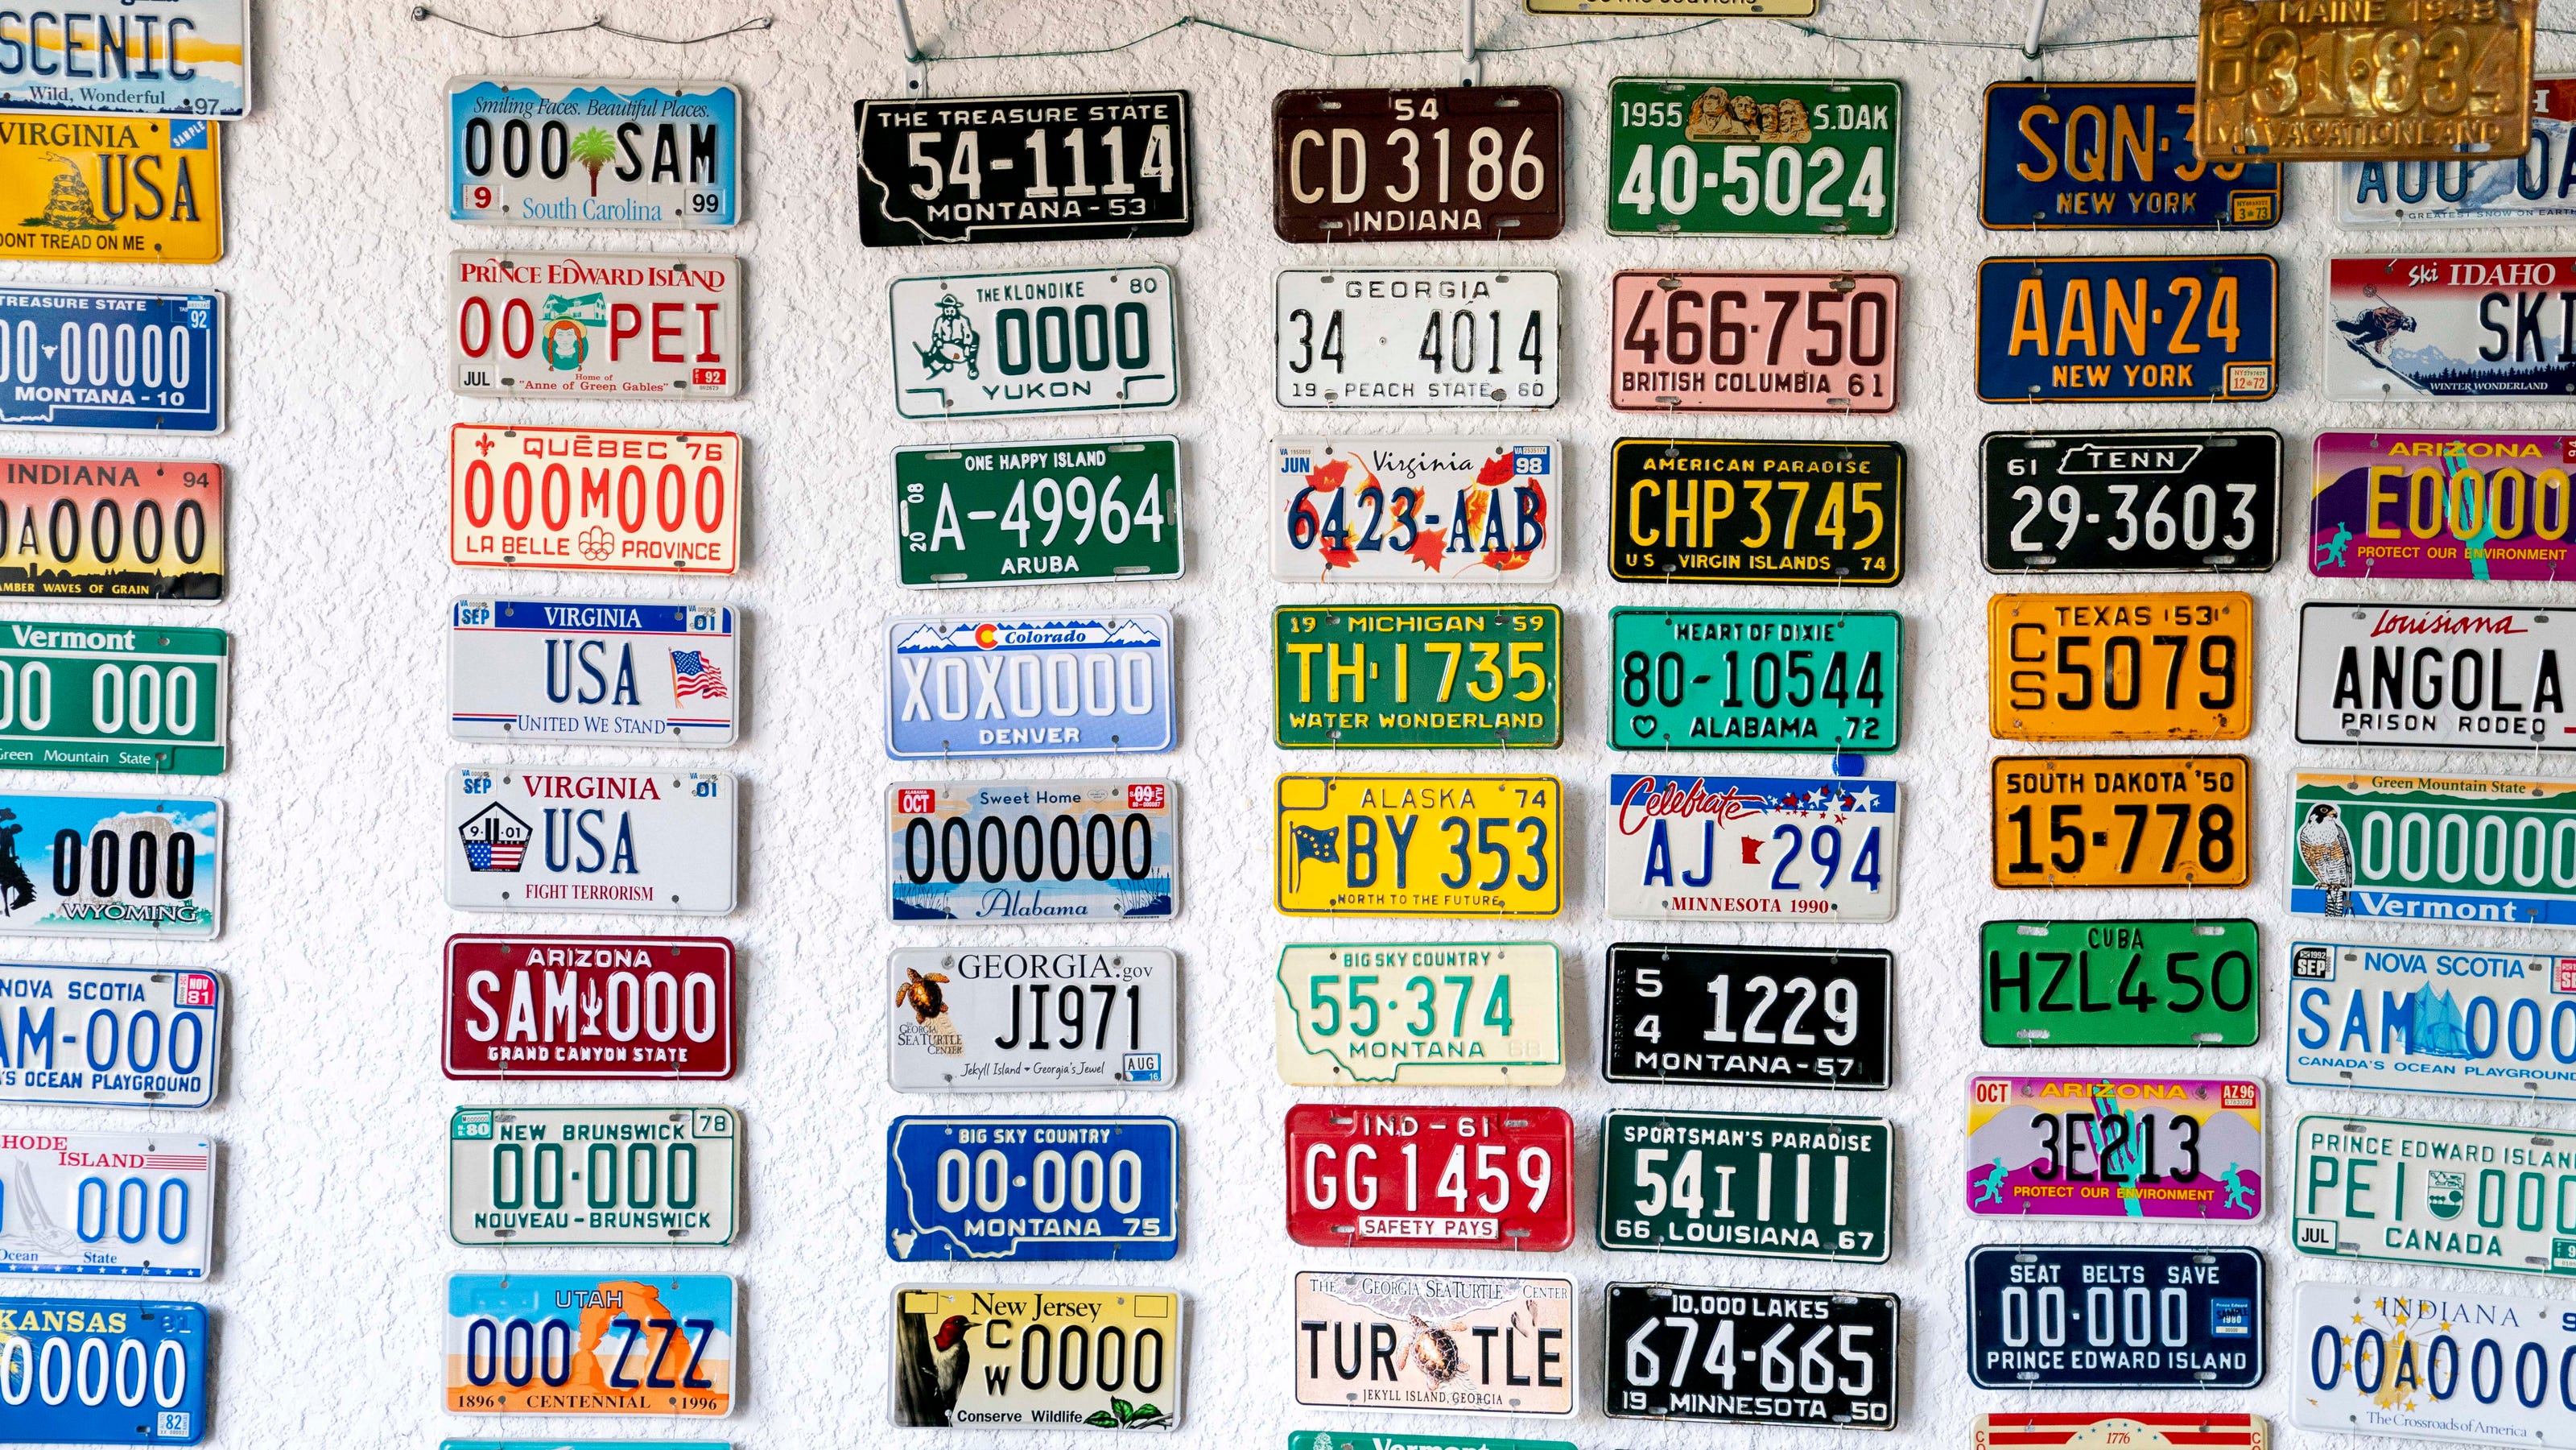 Florida specialty license plates Which are the most popular designs?